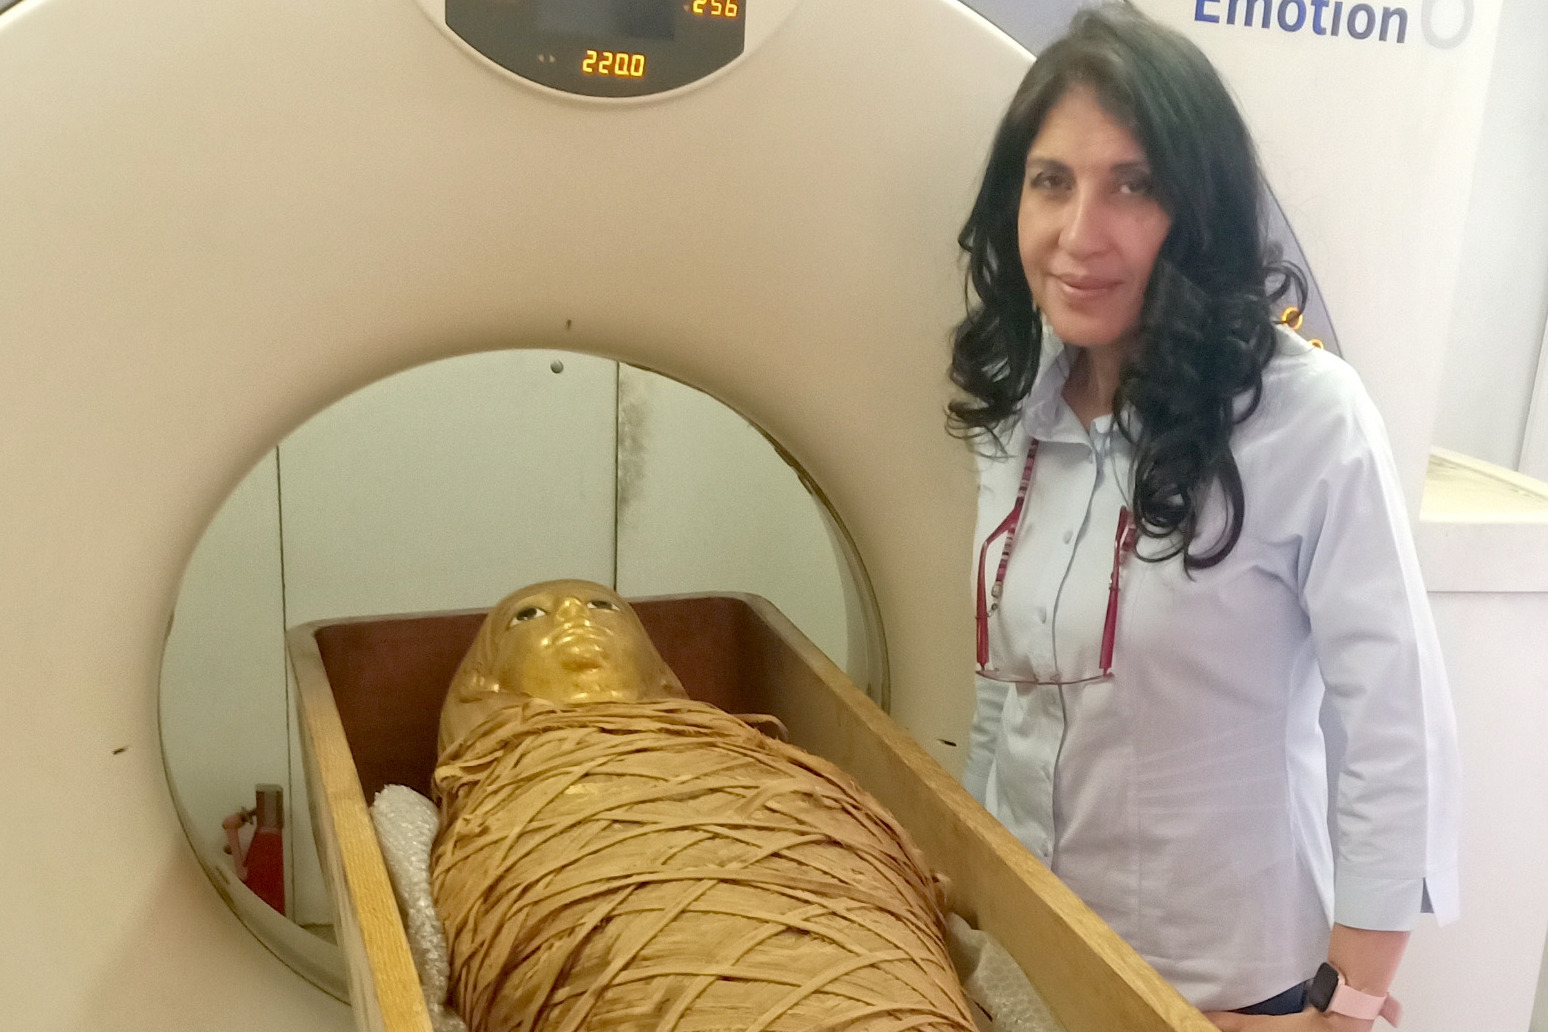 Perfectly wrapped ancient Egyptian mummy digitally ‘unwrapped’ for first time 